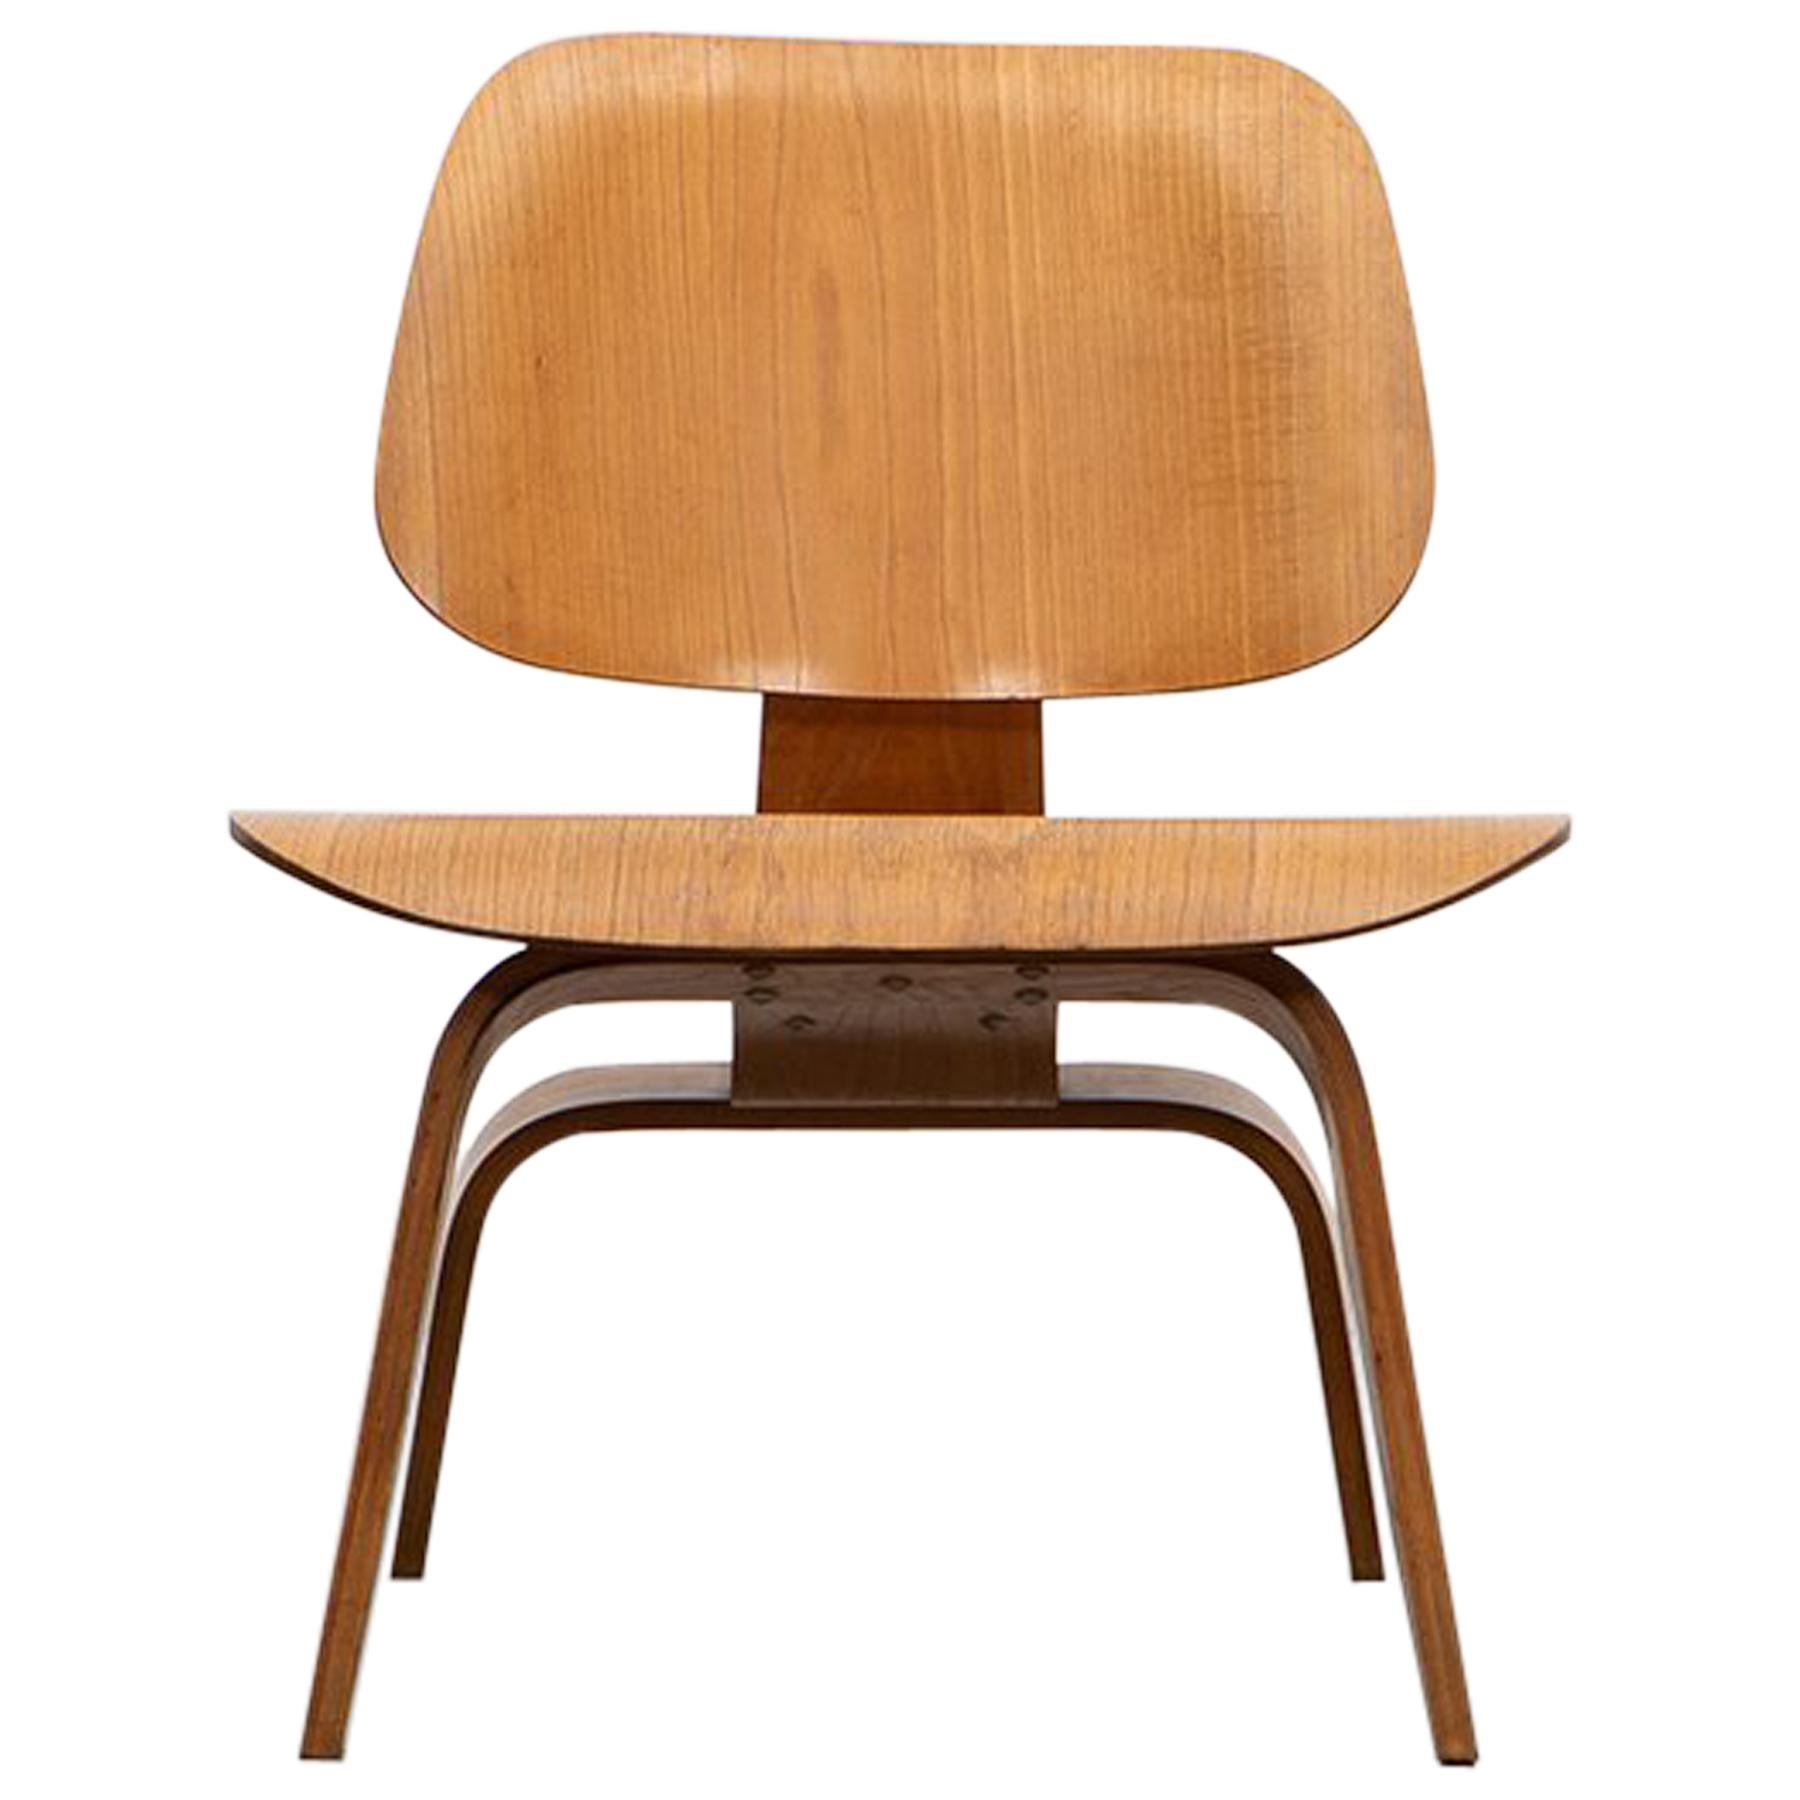 1940s Ash Plywood LCW Chair by Charles & Ray Eames "F"